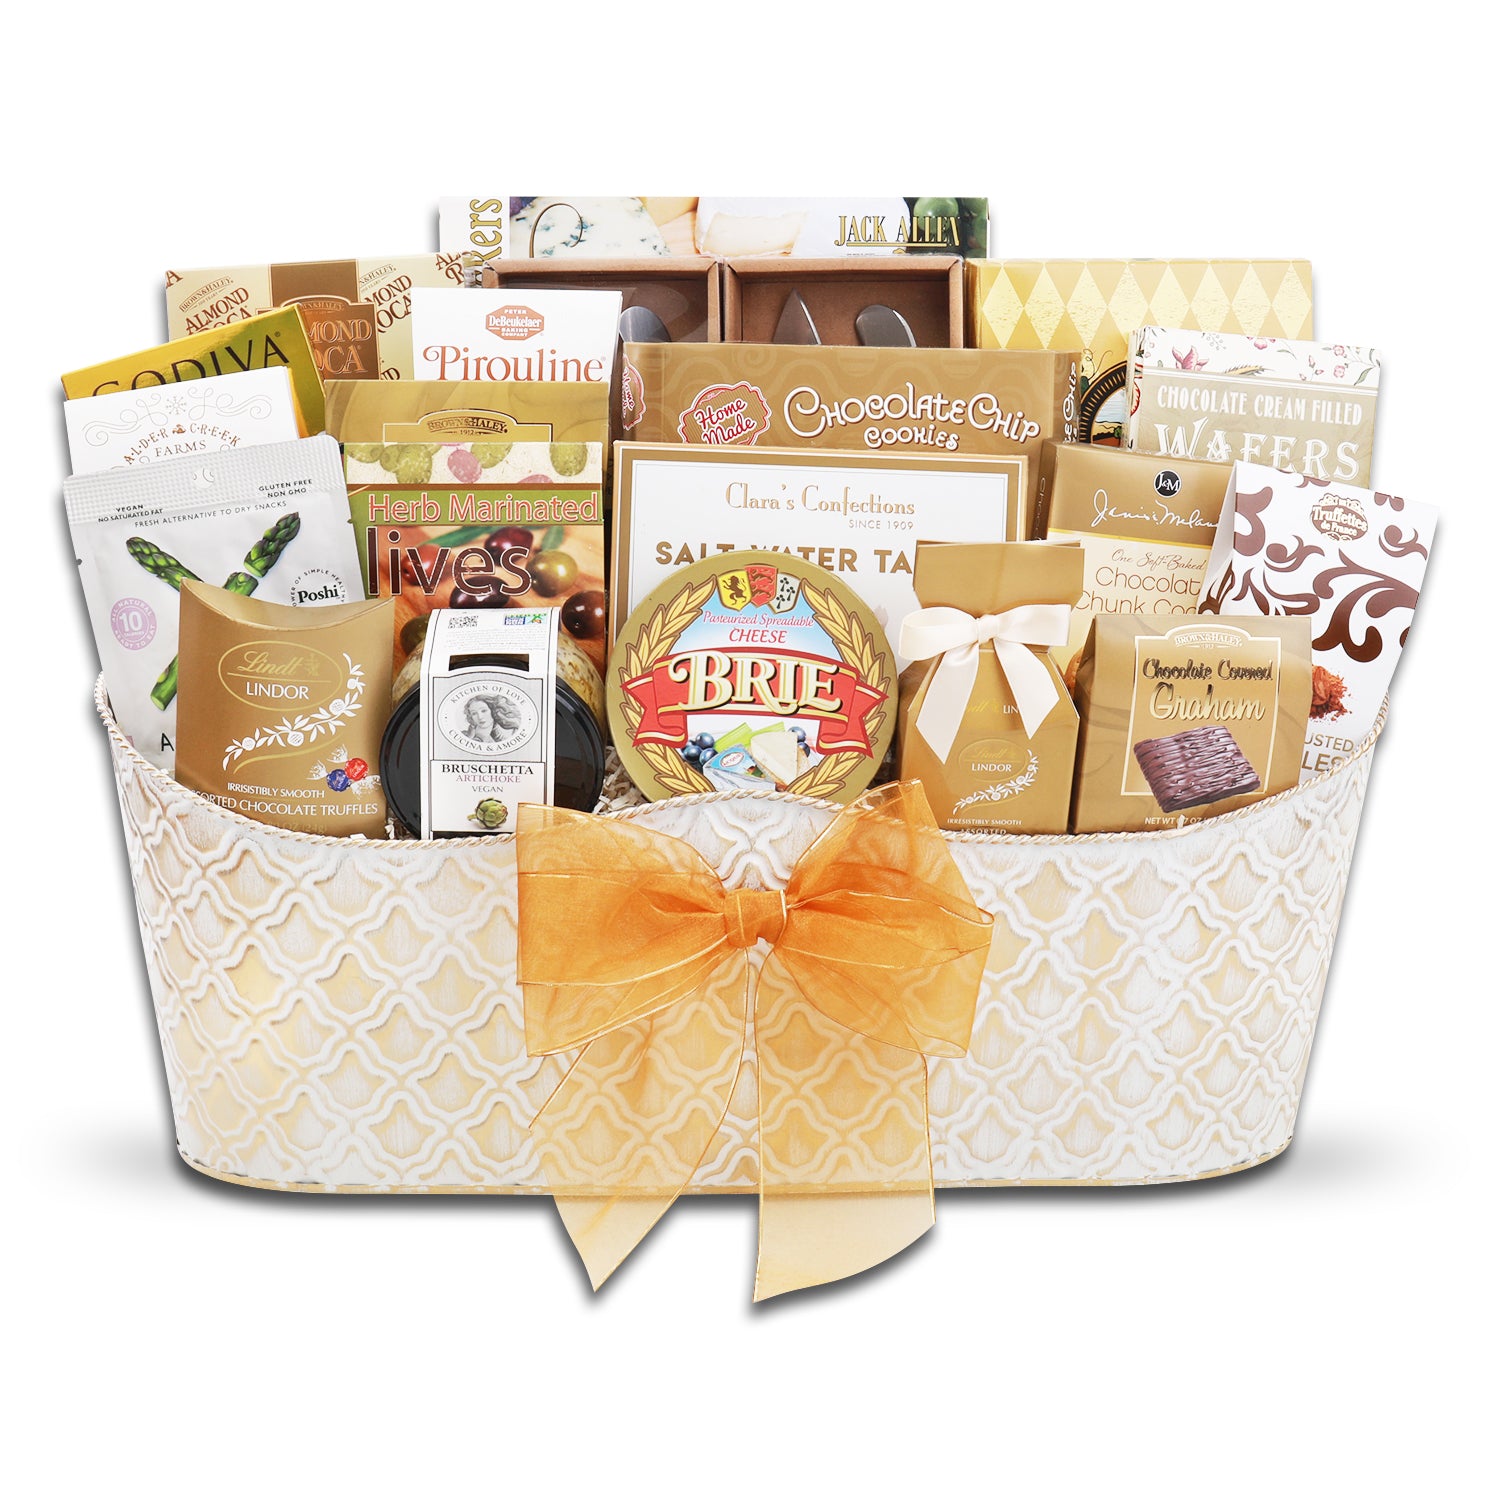 Gift contents arranged in white and gold packaging inside a Reusable White Cream Metal Basket with a gold bow.